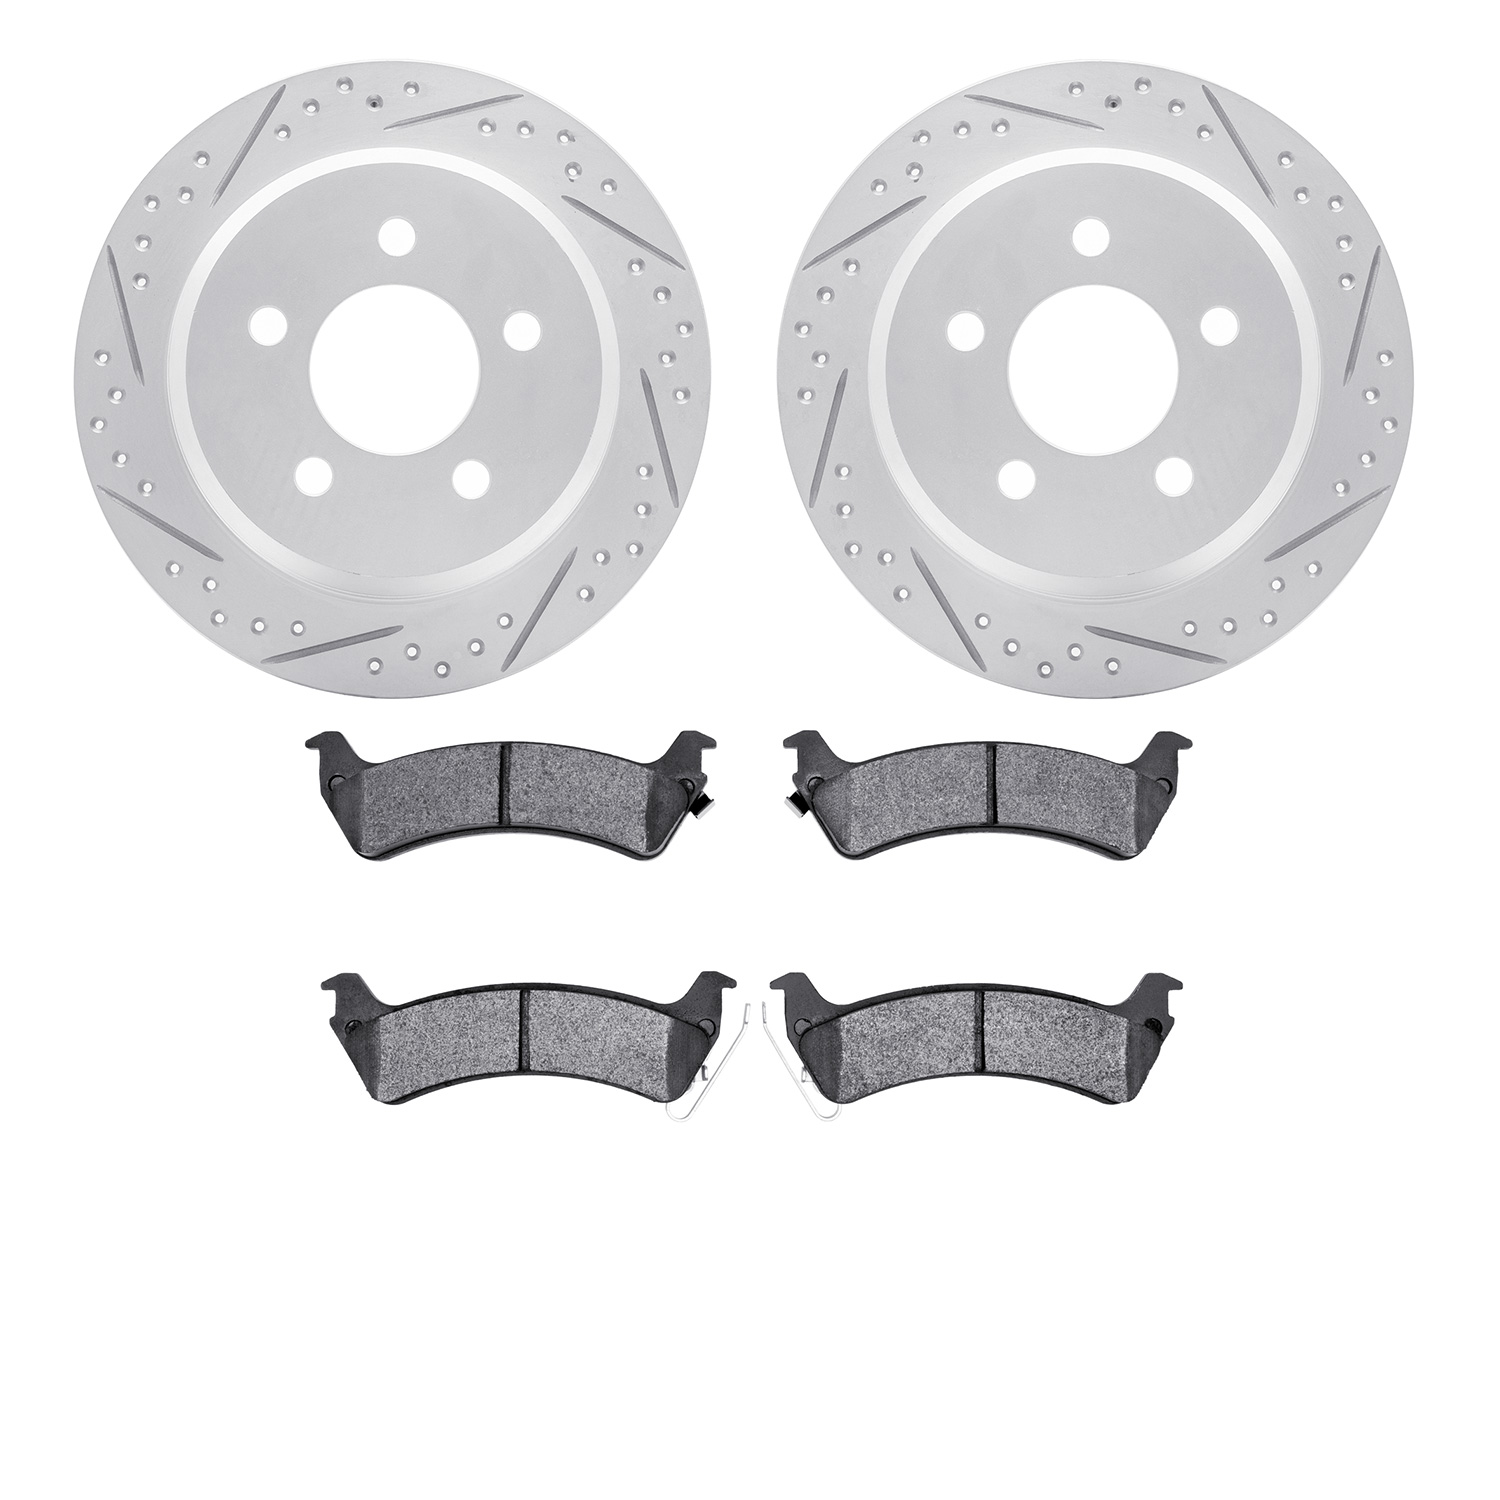 Geoperformance Drilled/Slotted Brake Rotors with Ultimate-Duty